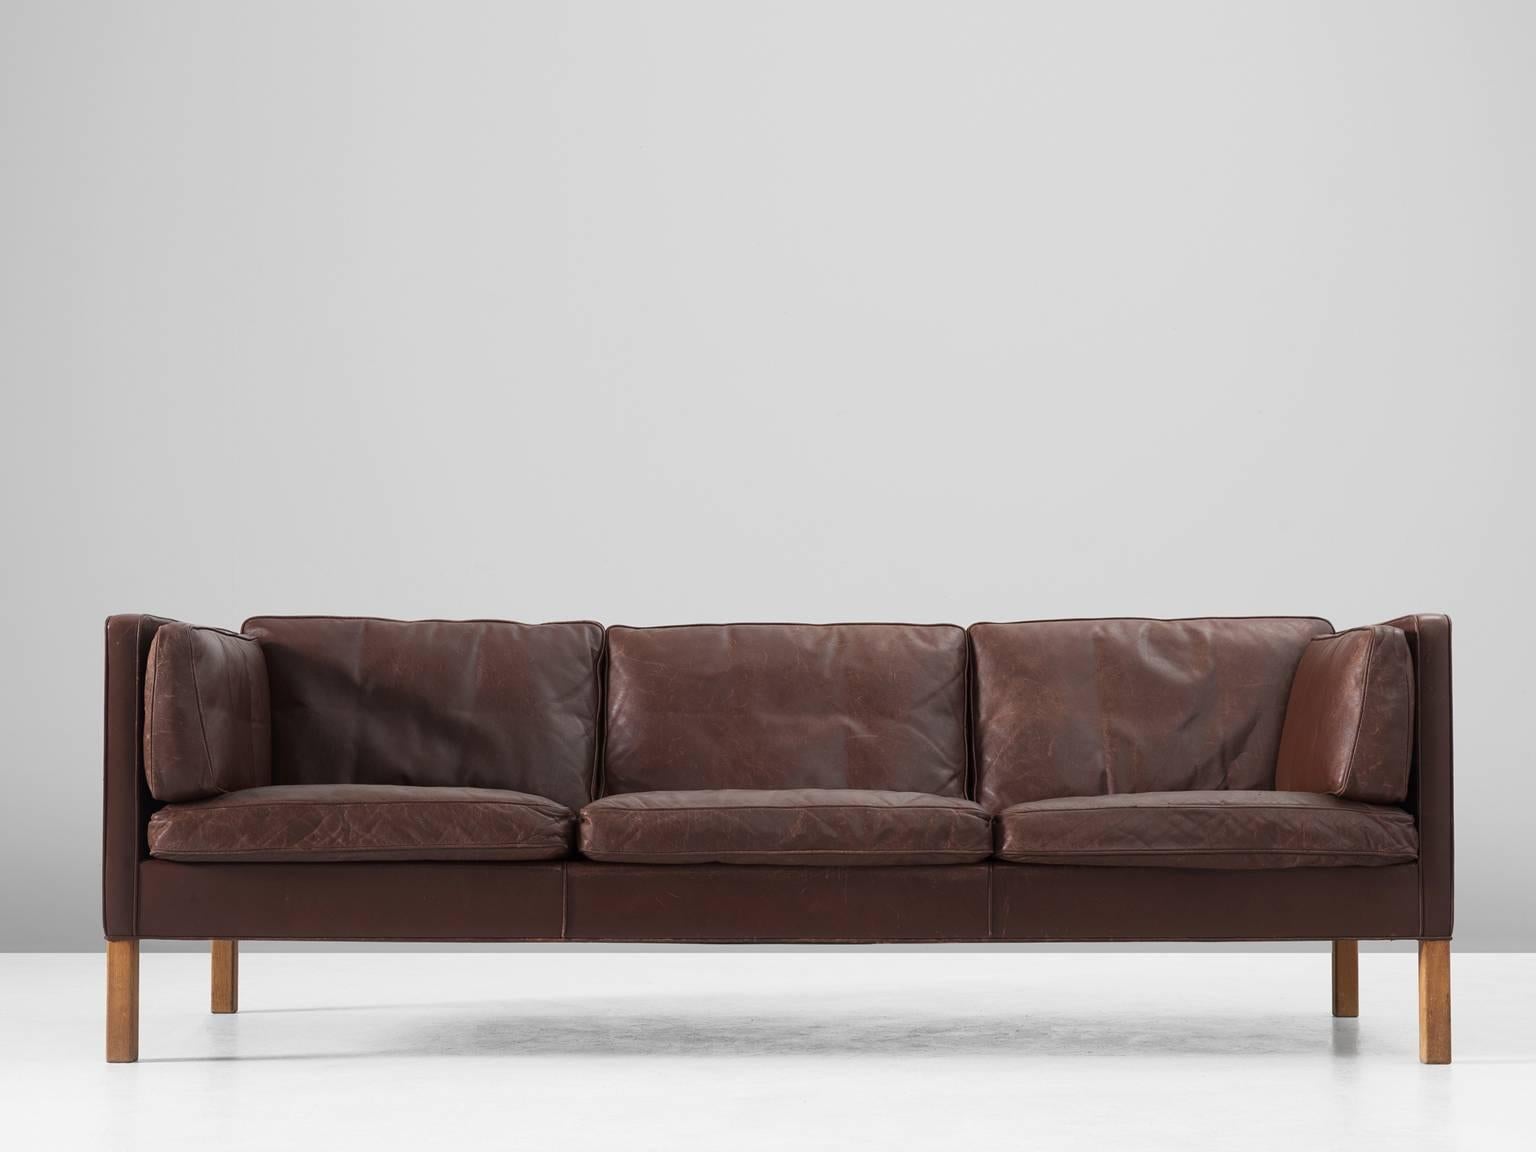 Børge Mogensen for Fredericia Stolefabrik, sofa model 2443, leather and oak, Denmark, 1960s.

This design comes from the 1960s and has wonderful shapes and comfort. The three-seater sofa comes with loose cushions in seating, back and sides. They are